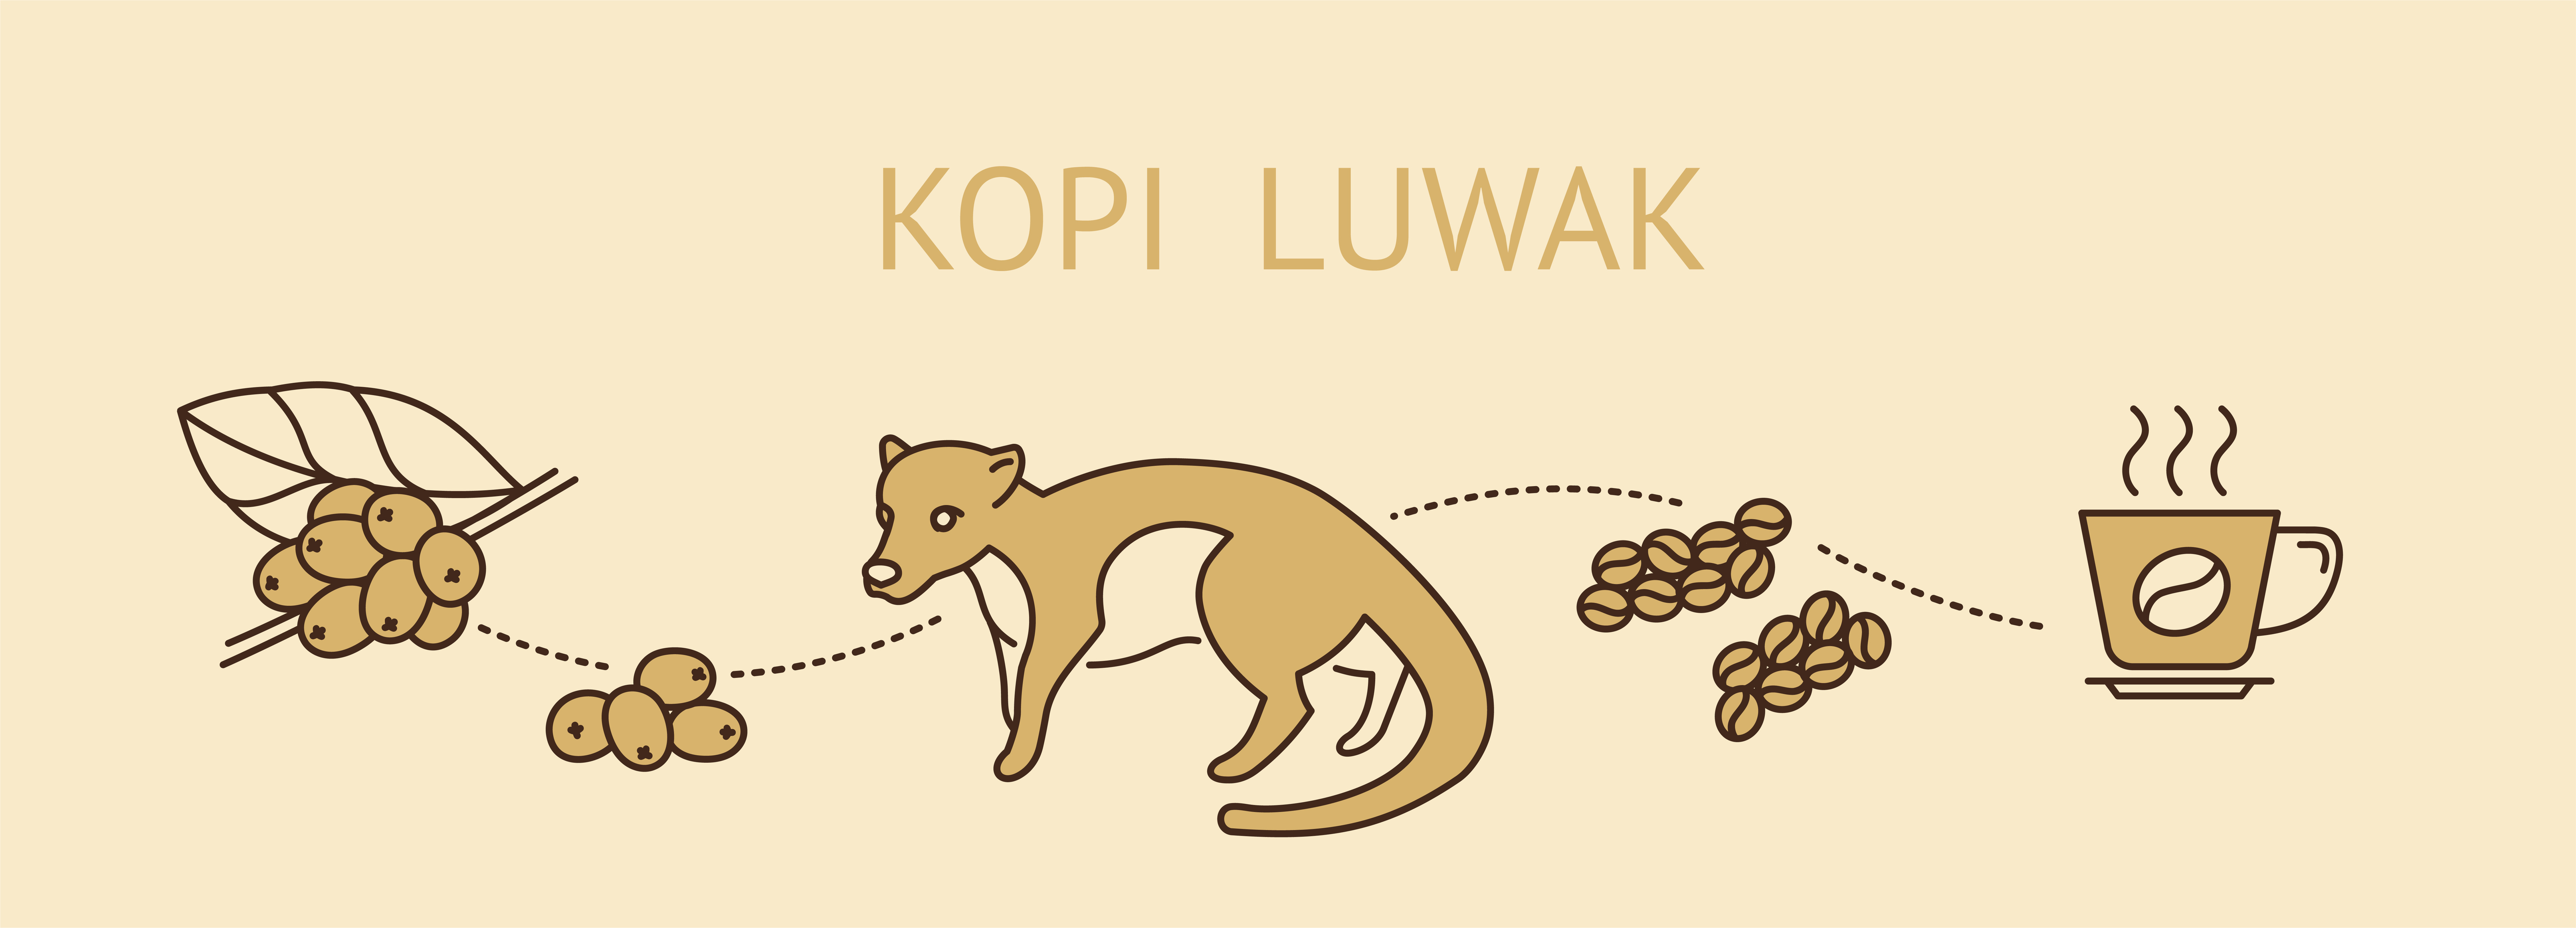 stages of production of coffee beans kopi luwak on white background